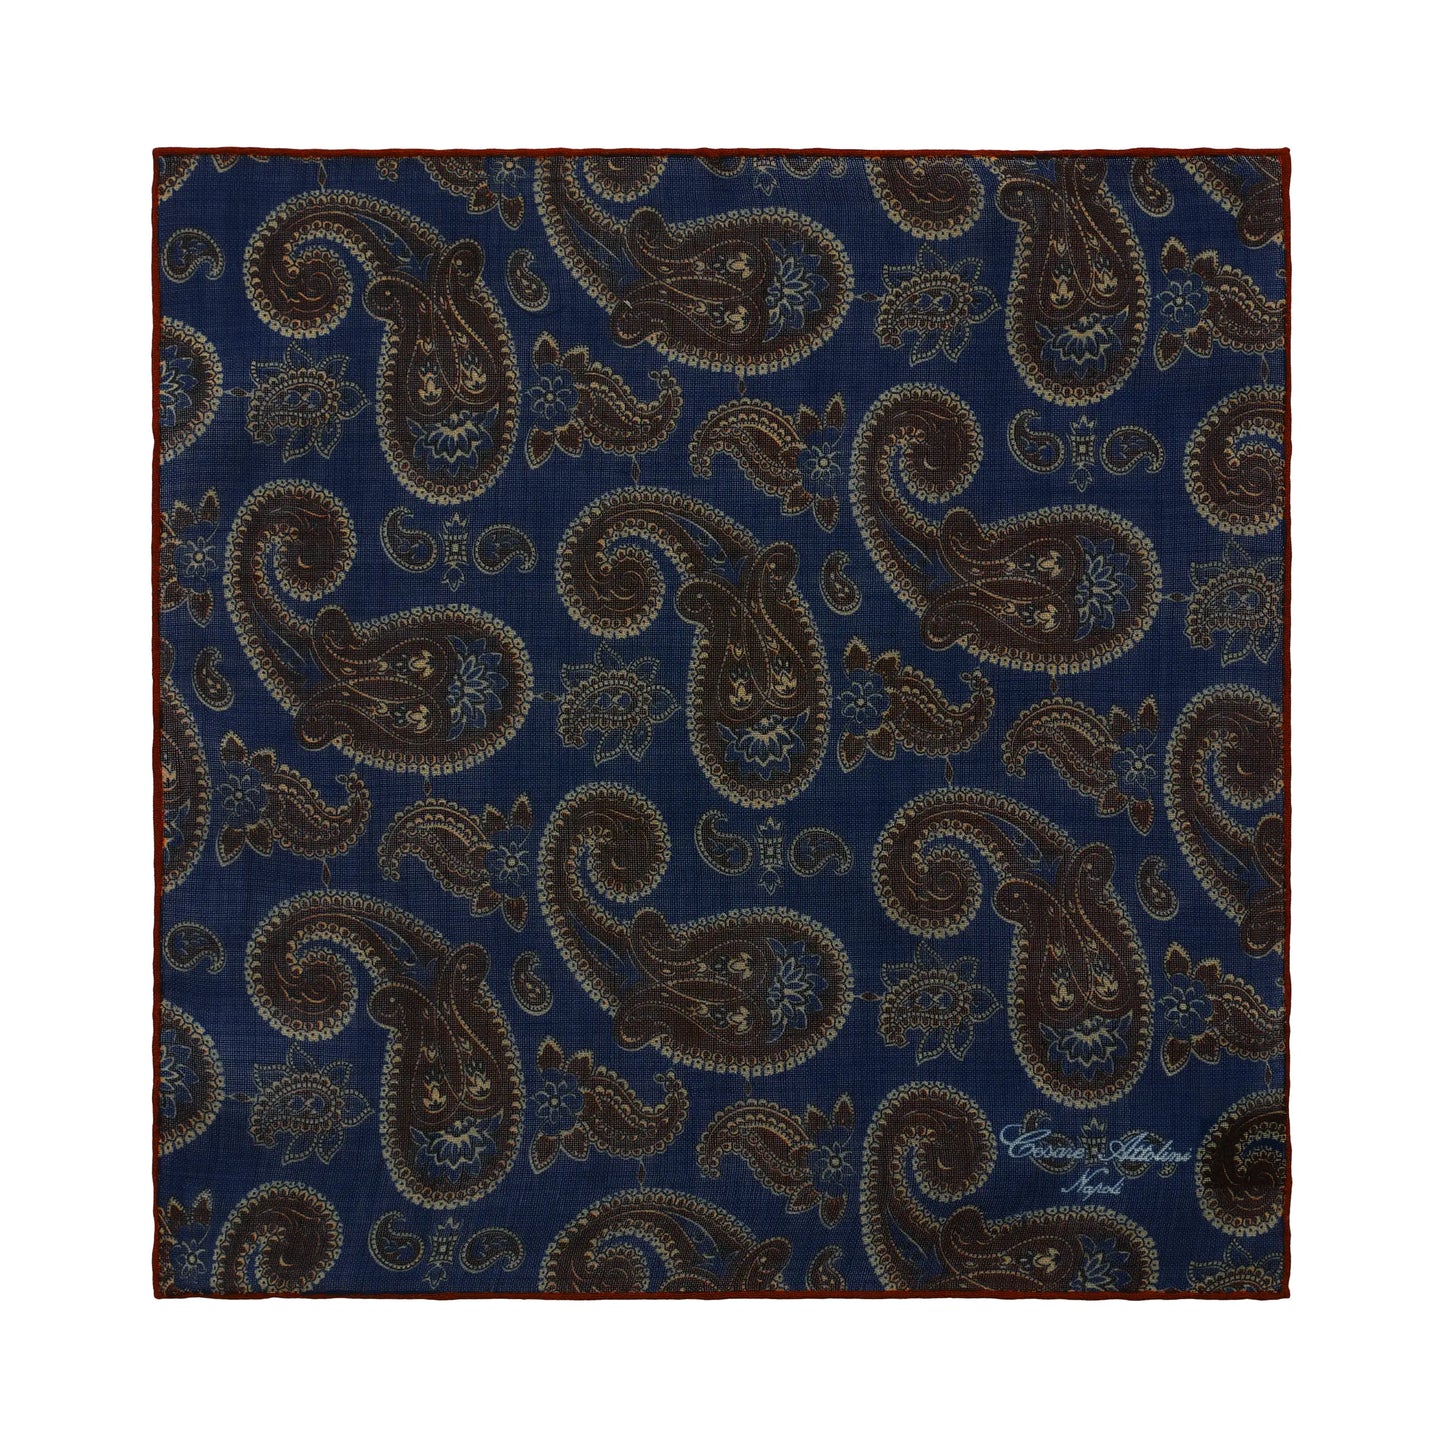 Paisley-Print Wool Pocket Square in Blue